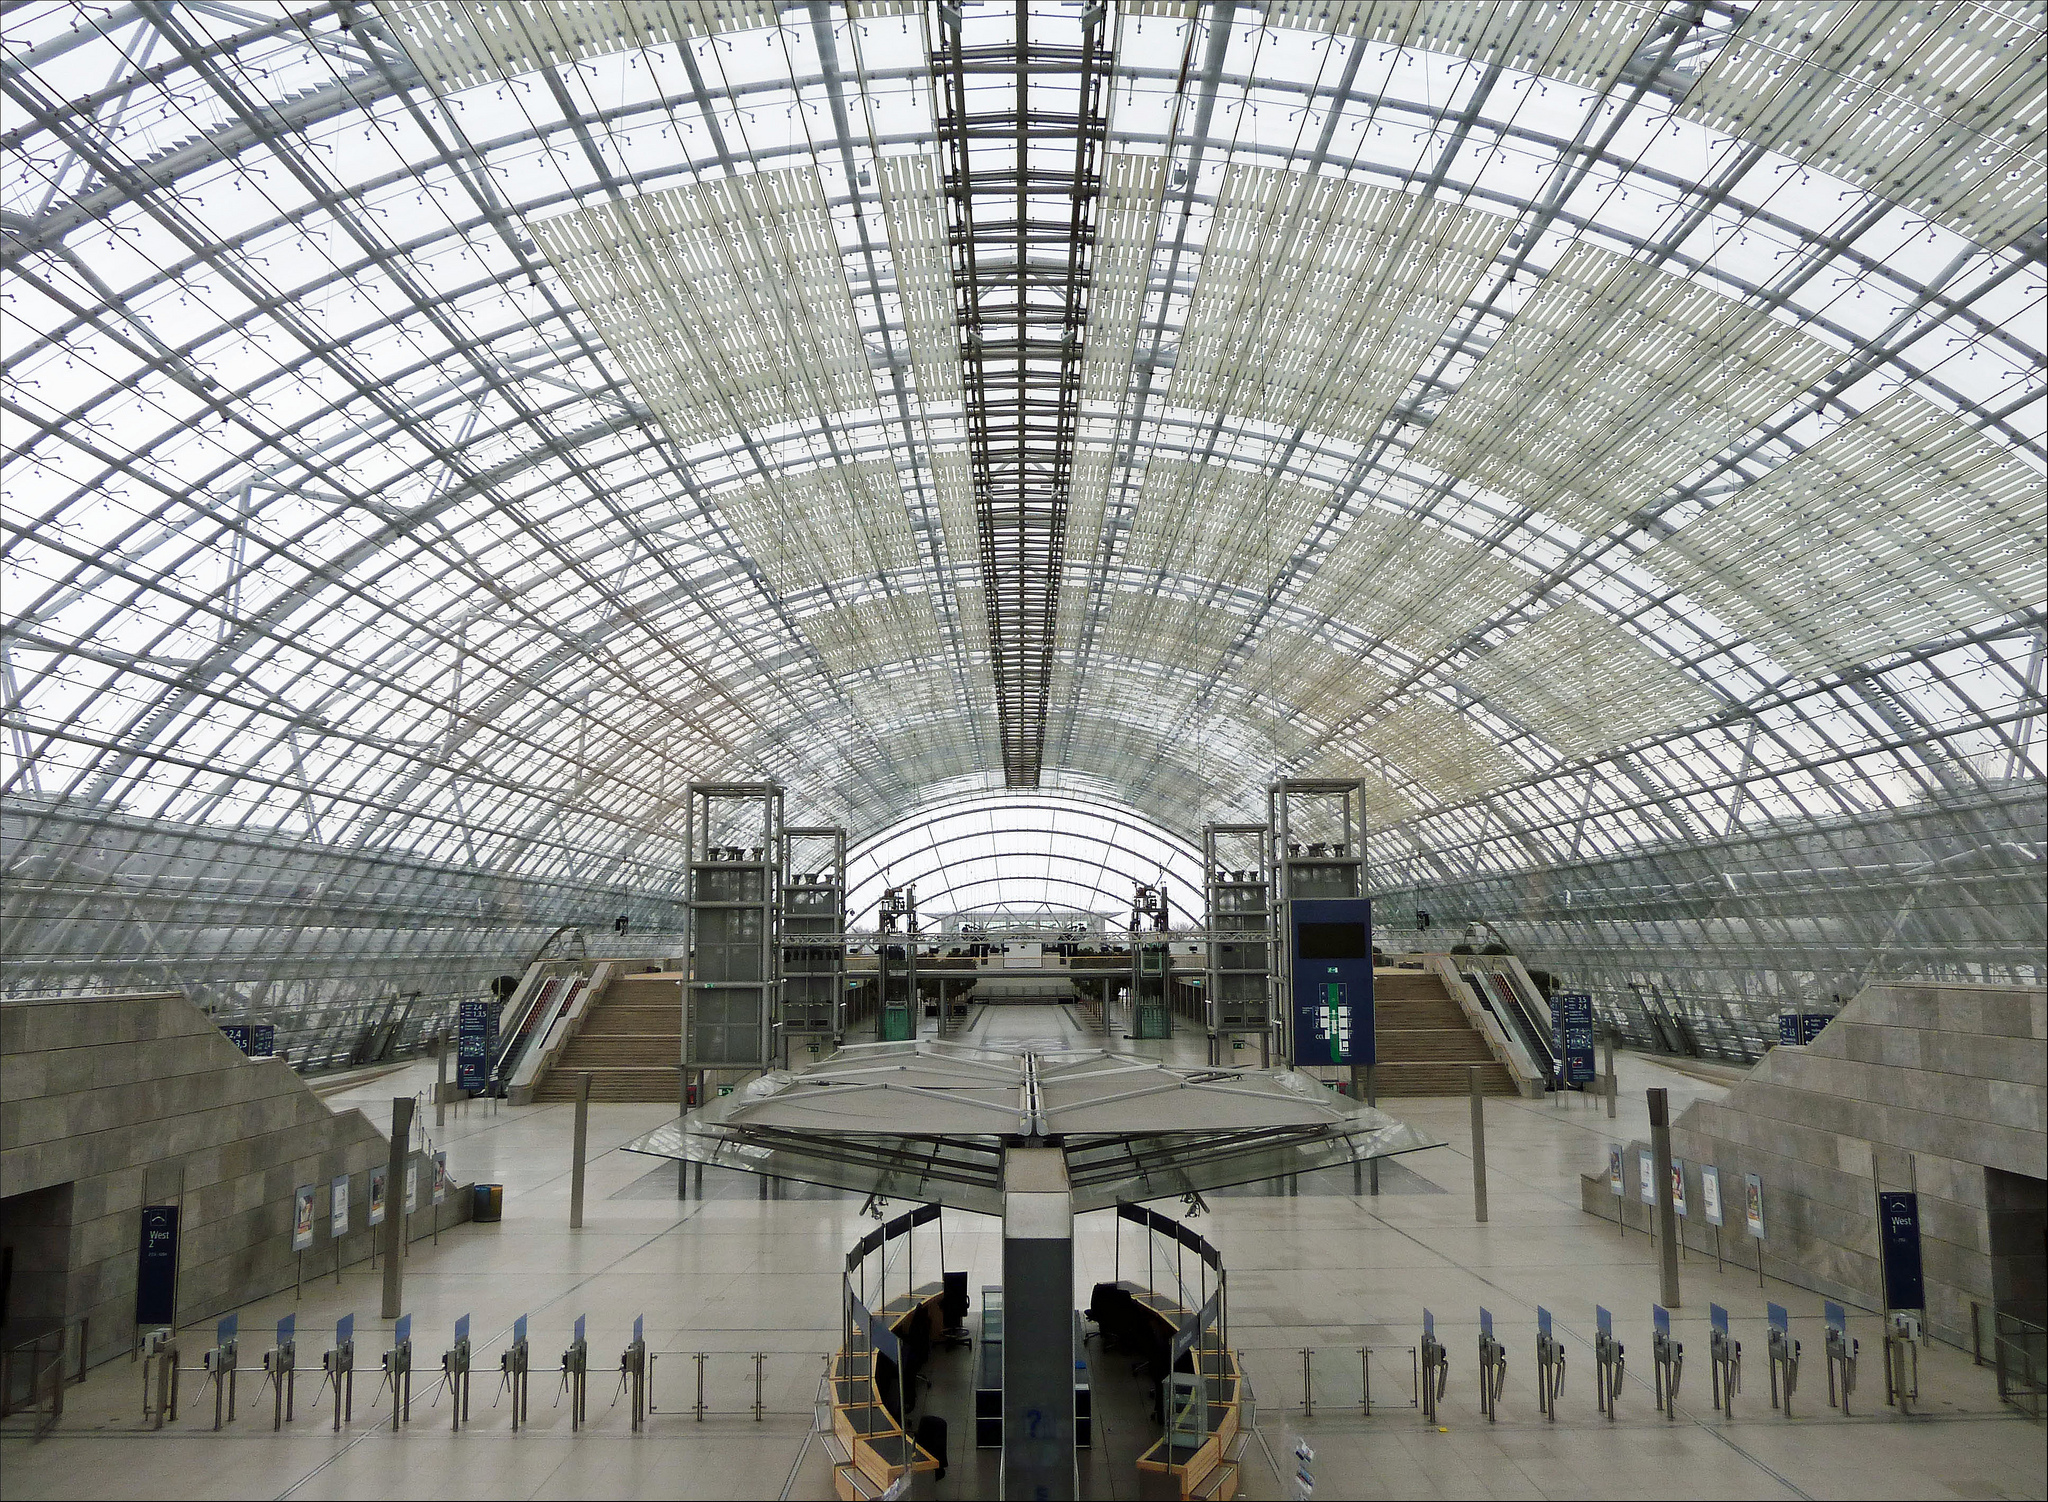 Leipziger Messe Exhibition and Convention Centre. Photo: Michael (CC BY-NC 2.0)